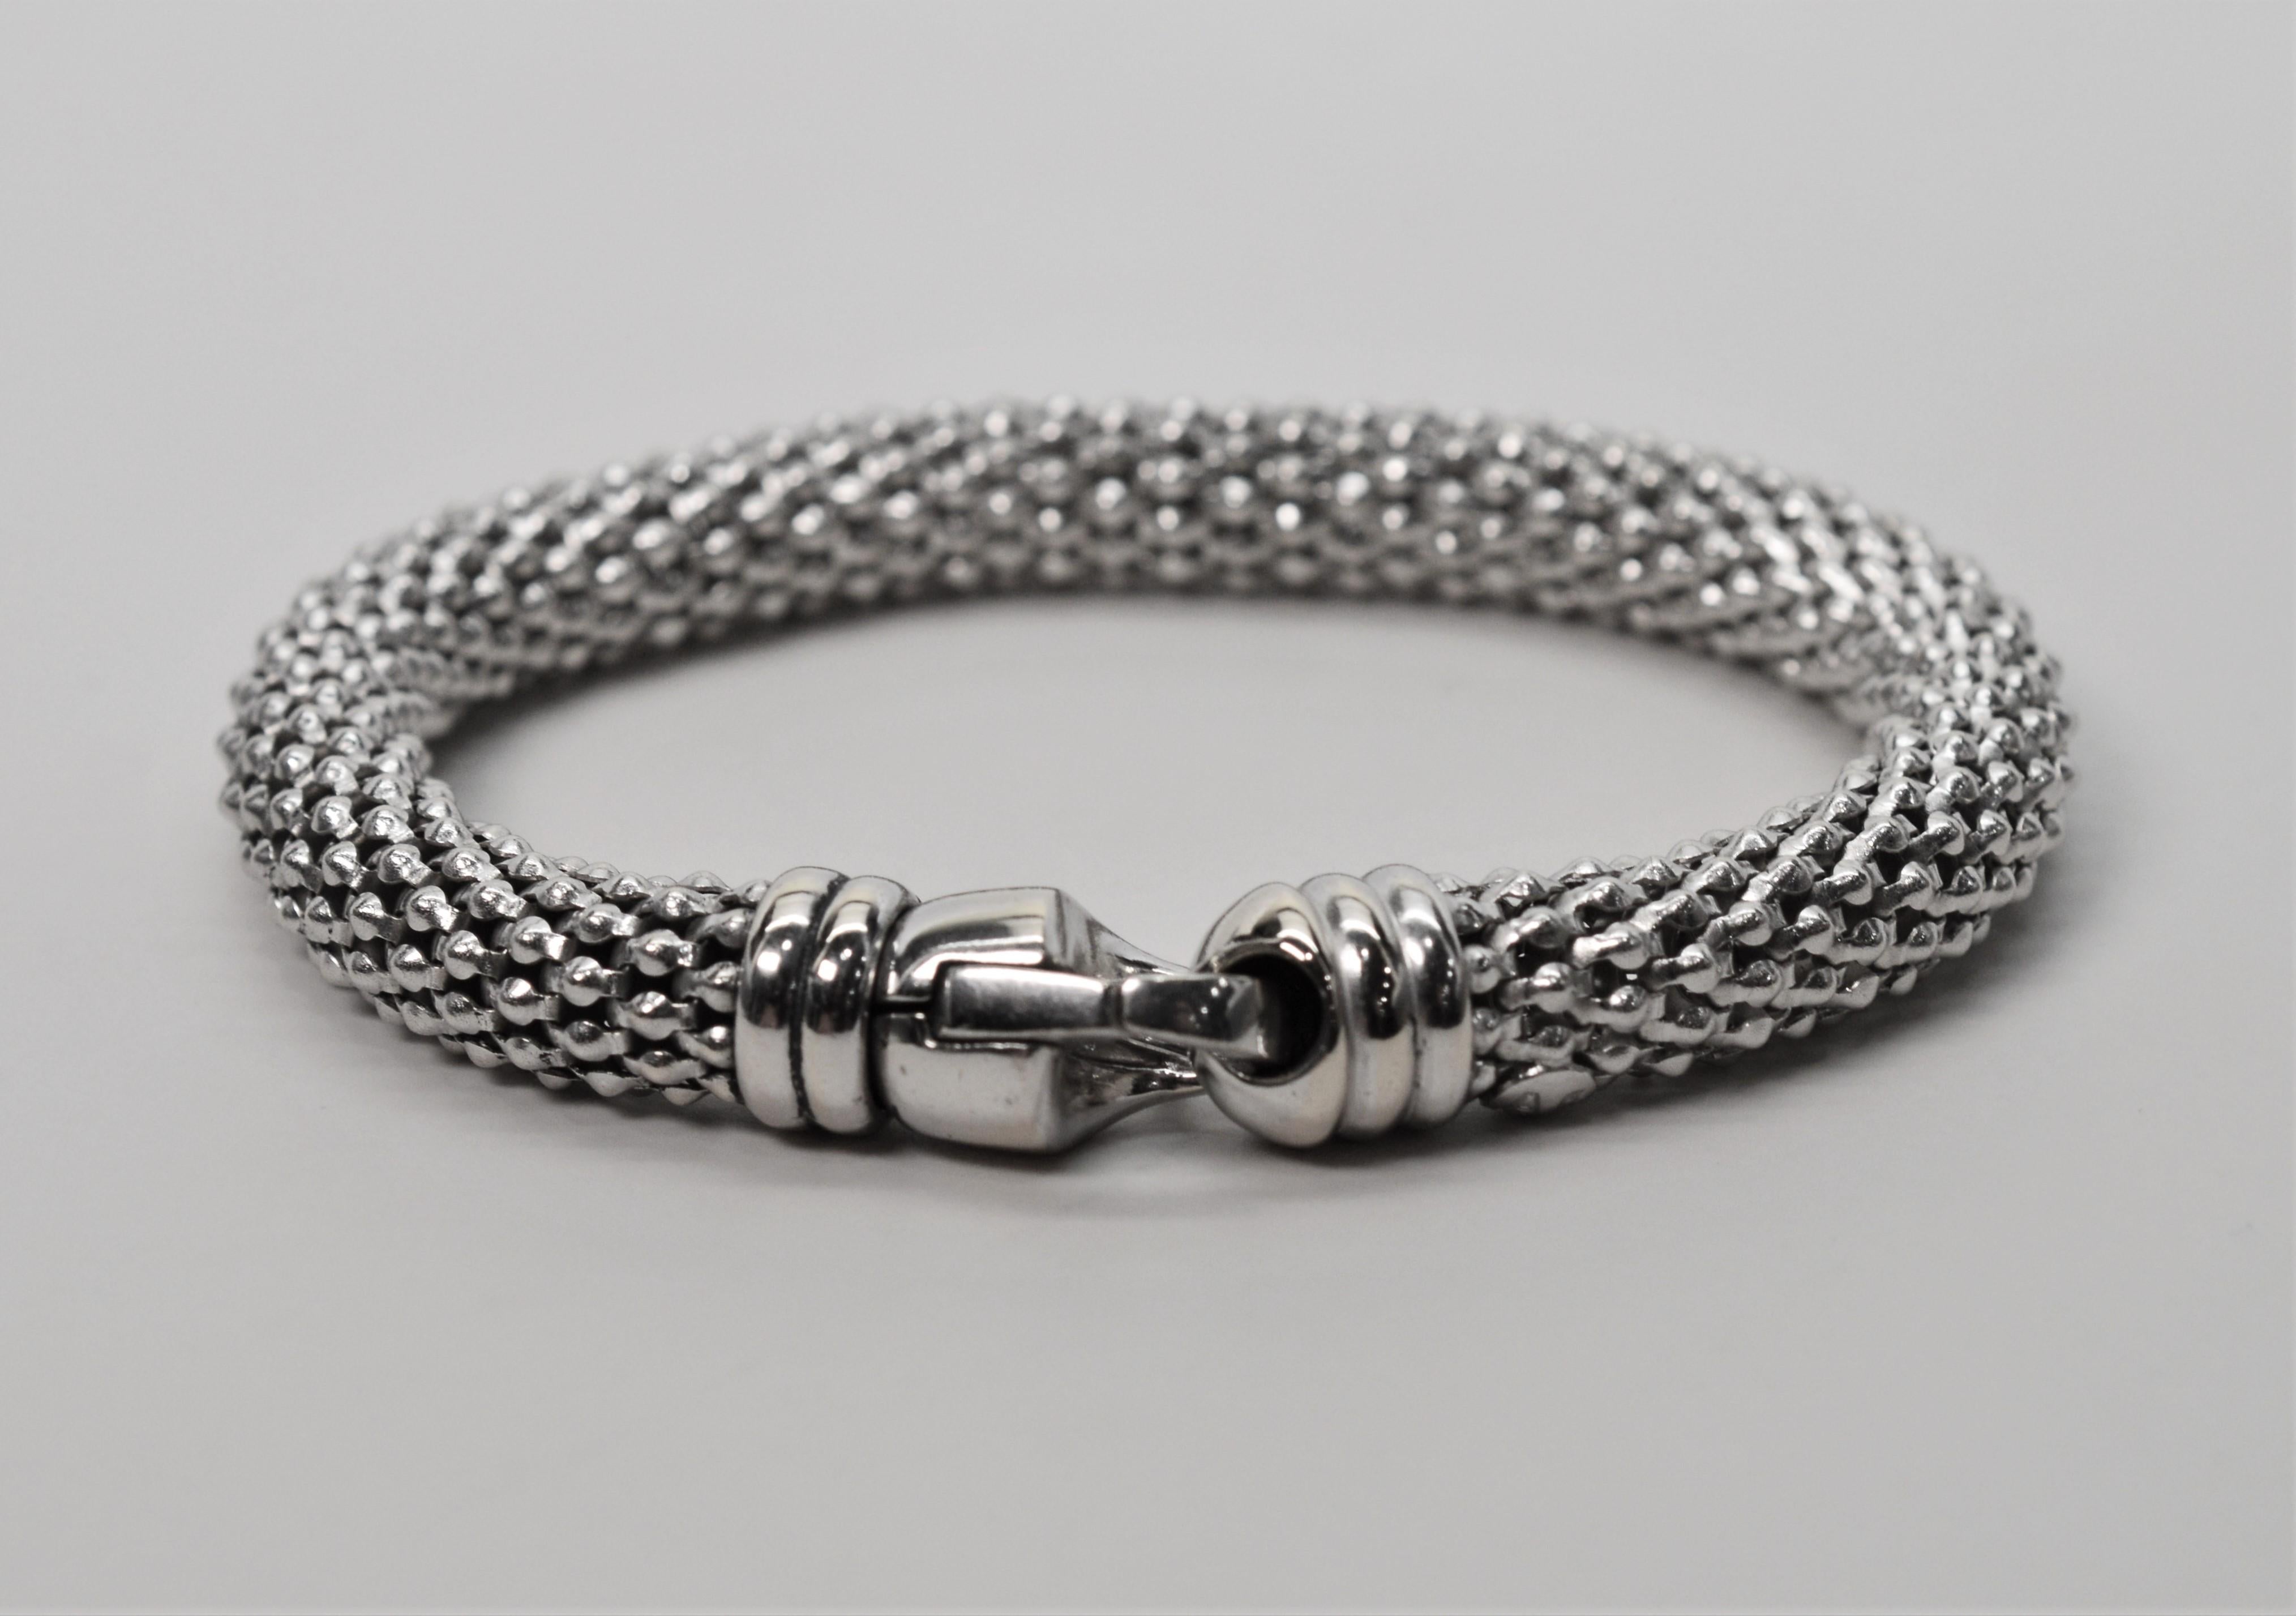 Quality Italian made in eighteen karat 18K white gold, you will find this contemporary 7.5 mm mesh rope bracelet with large decorative lobster clasp
a jewelry wardrobe staple. Comfortable to wear at 8.5 inches long and with a neutral design that